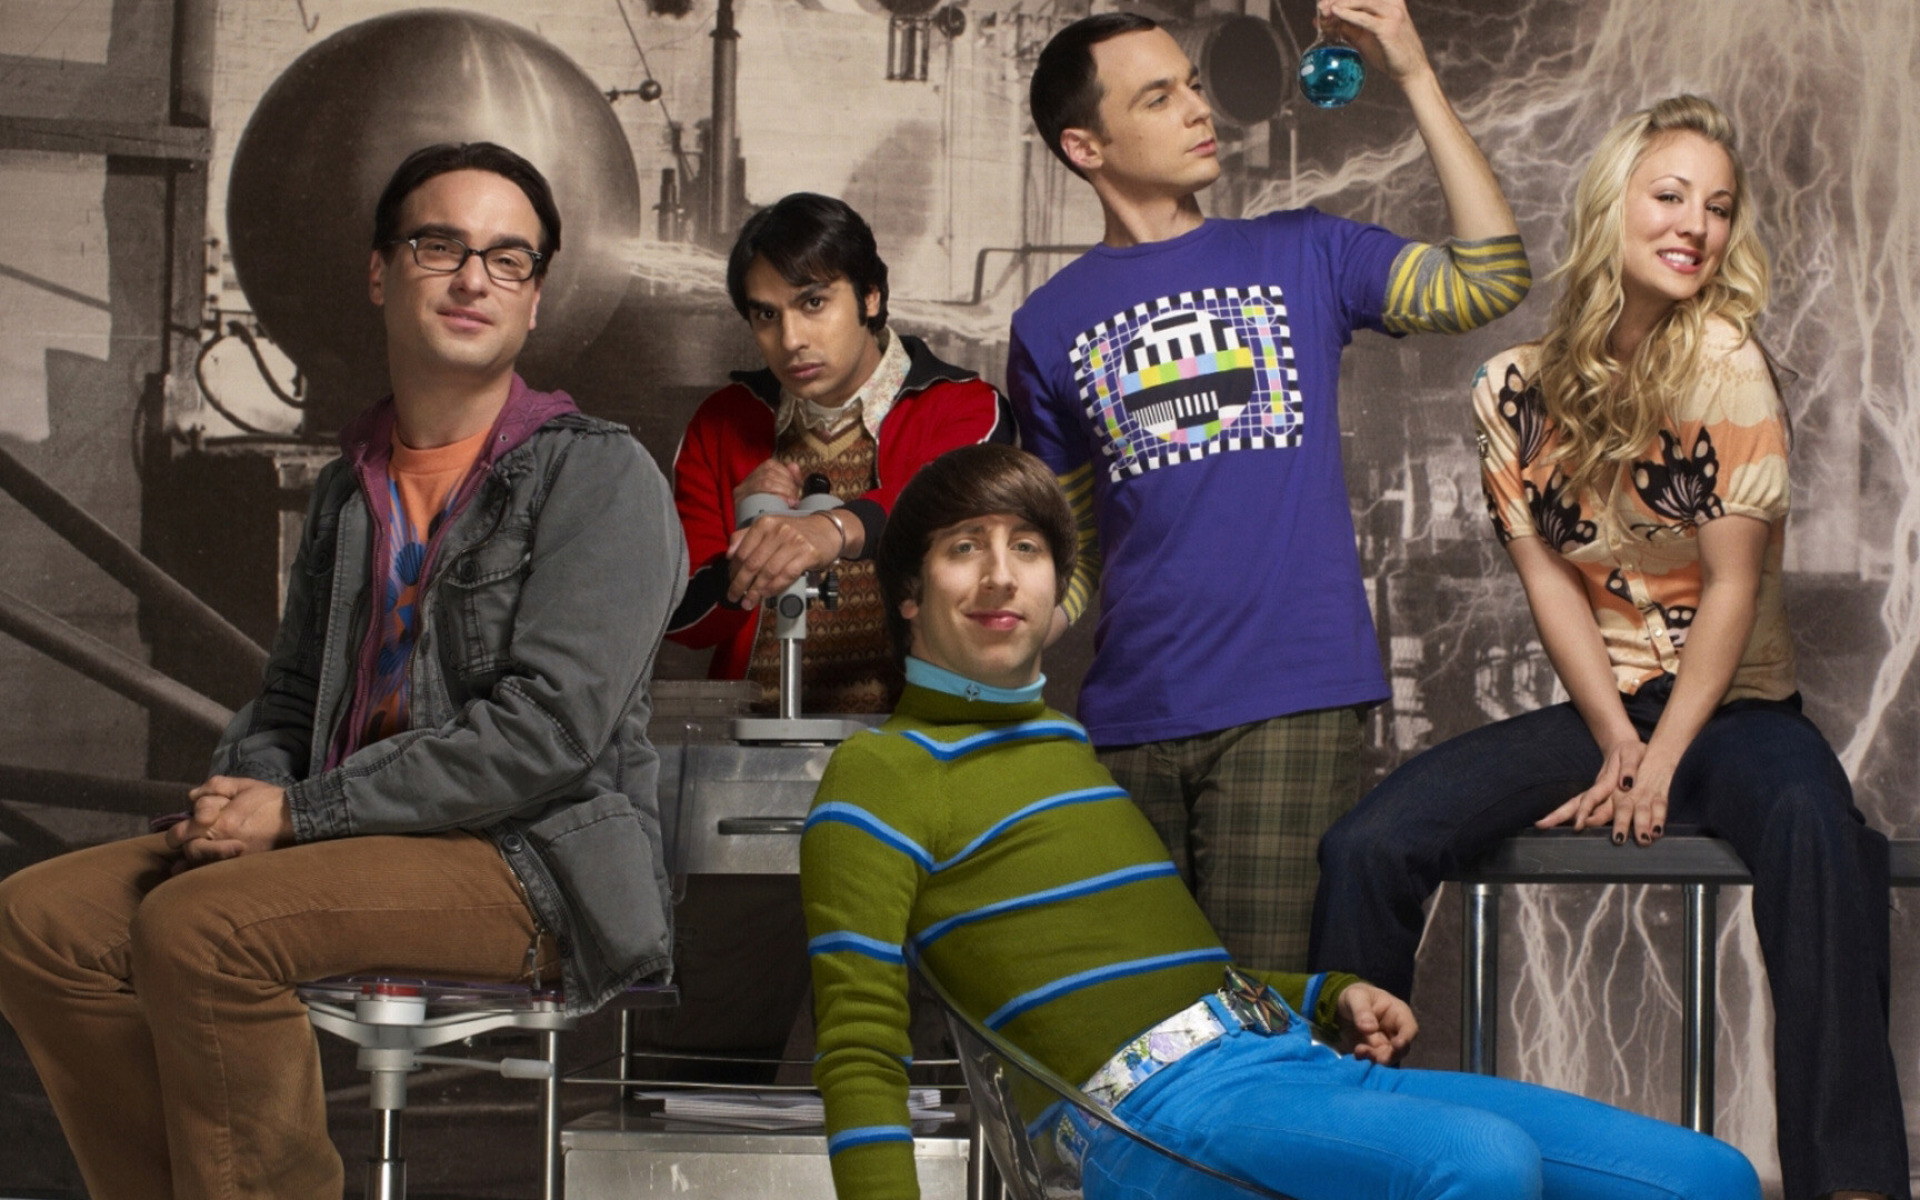 The Big Bang Theory: The lives of four socially awkward friends, Leonard, Sheldon, Howard, and Raj, take a wild turn when they meet the beautiful and free-spirited Penny. 1920x1200 HD Background.